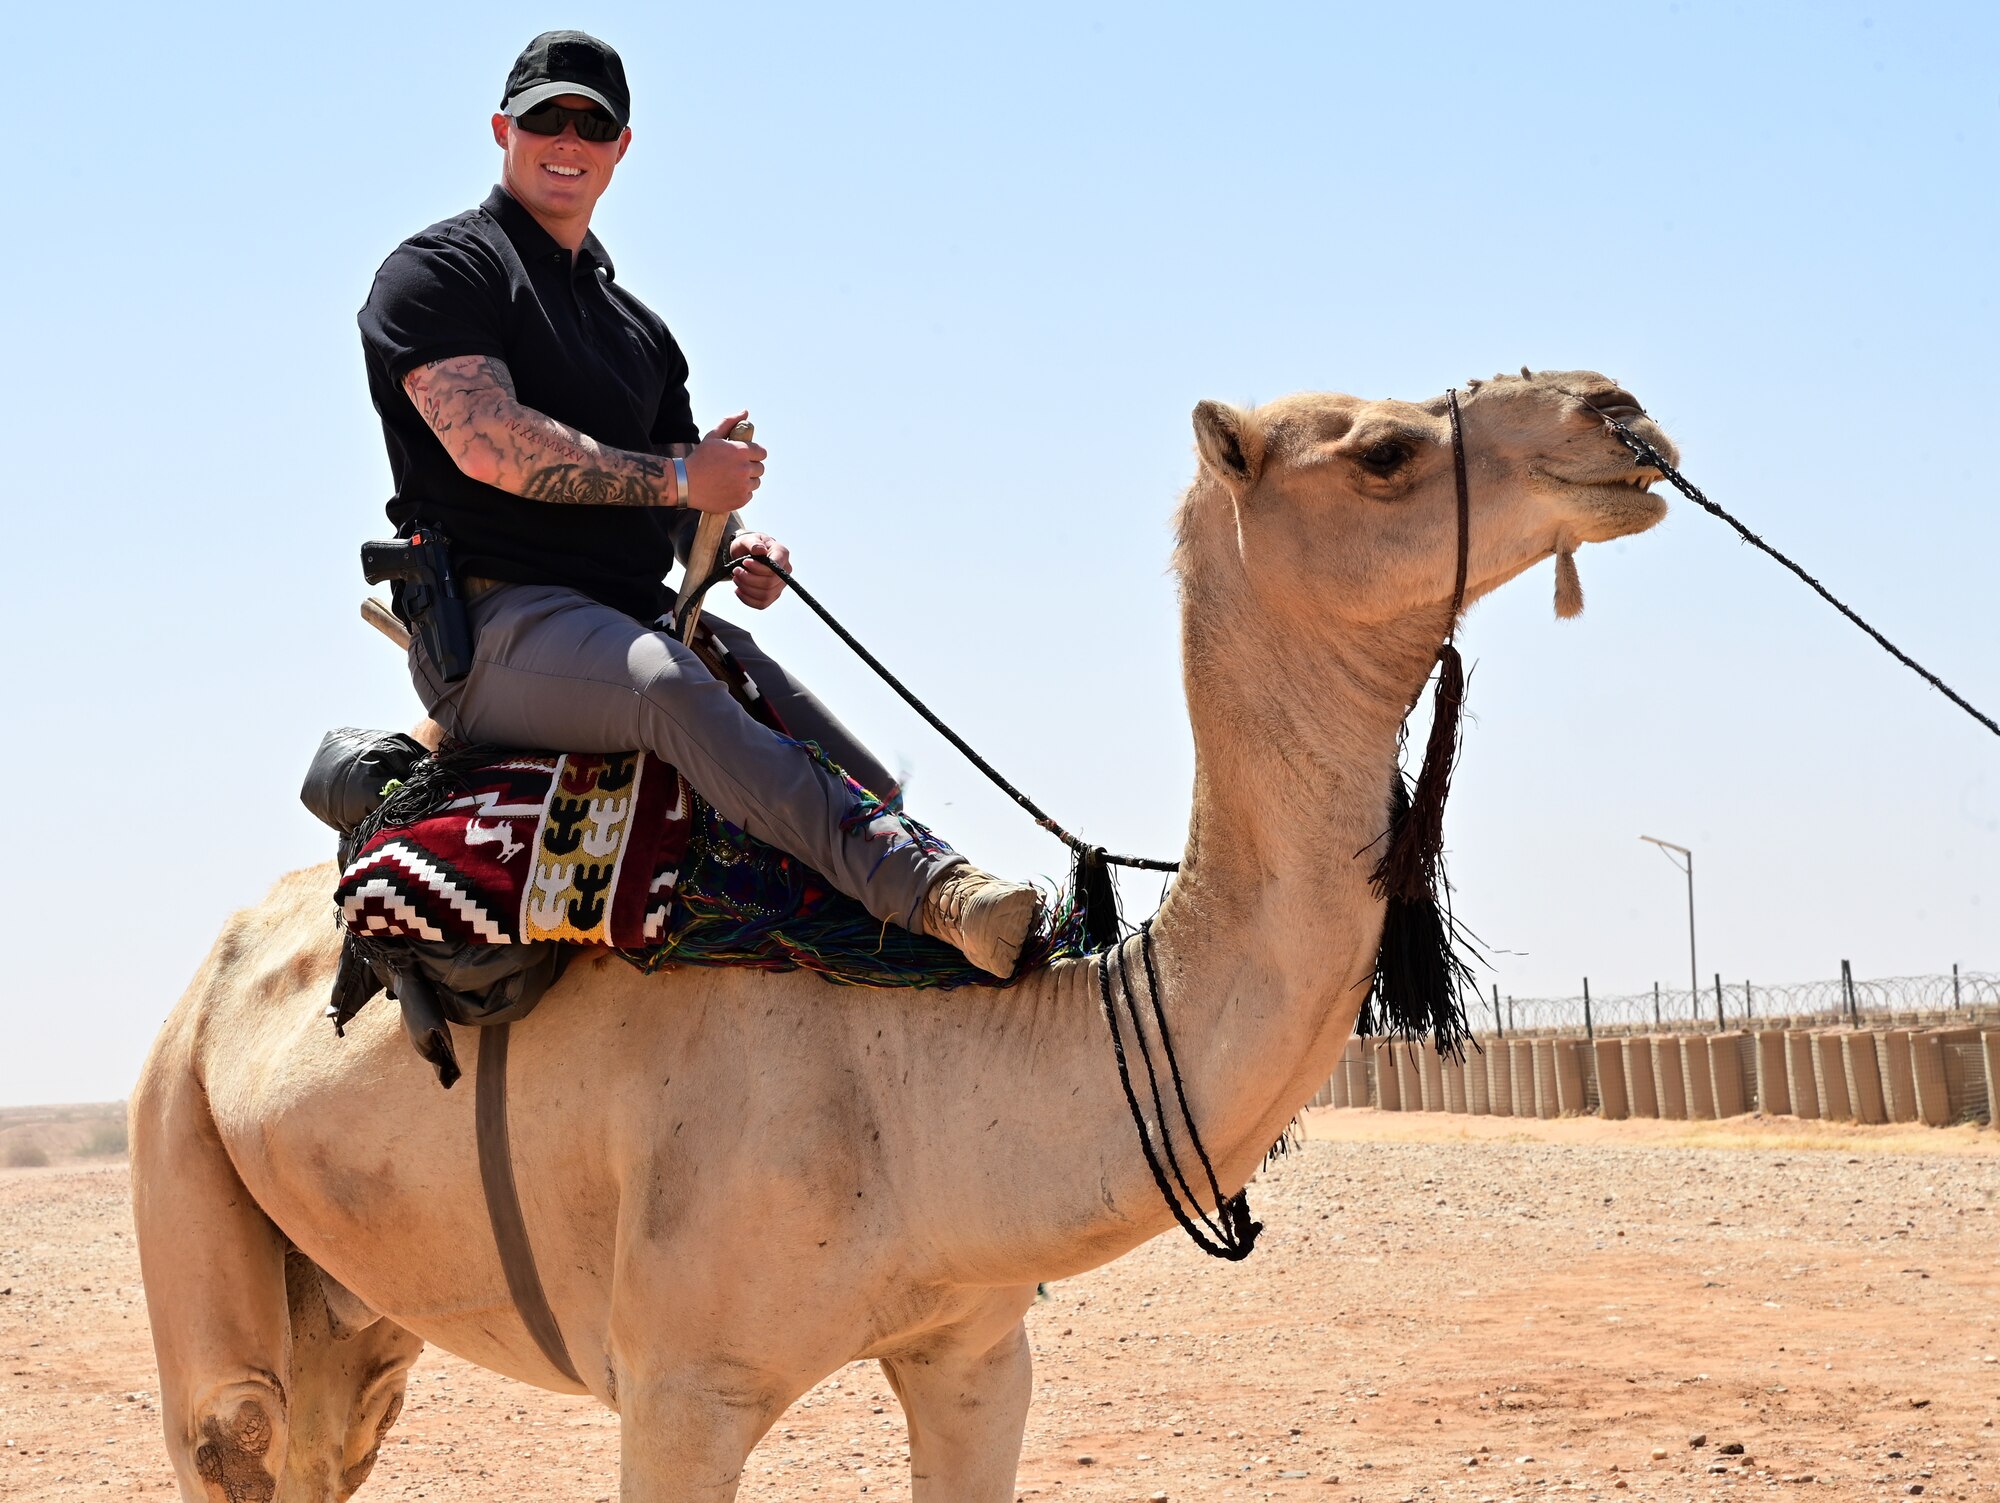 U.S. Air Force Airman 1st Class Brian Schmidt, 409th Expeditionary Security Forces Squadron member, rides a camel during a bazaar at Nigerien Air Base 201, Agadez, Niger, Feb. 27, 2022. Over 40 local vendors from the city of Agadez and surrounding villages attended the bazaar, selling various goods.  U.S. service members purchased approximately 10,532,000 West African CFA francs ($18K USD) worth of goods. Events like these enhance U.S., Niger relationships and stimulate local economic development. (U.S. Air Force photo by Tech. Sgt. Stephanie Longoria)